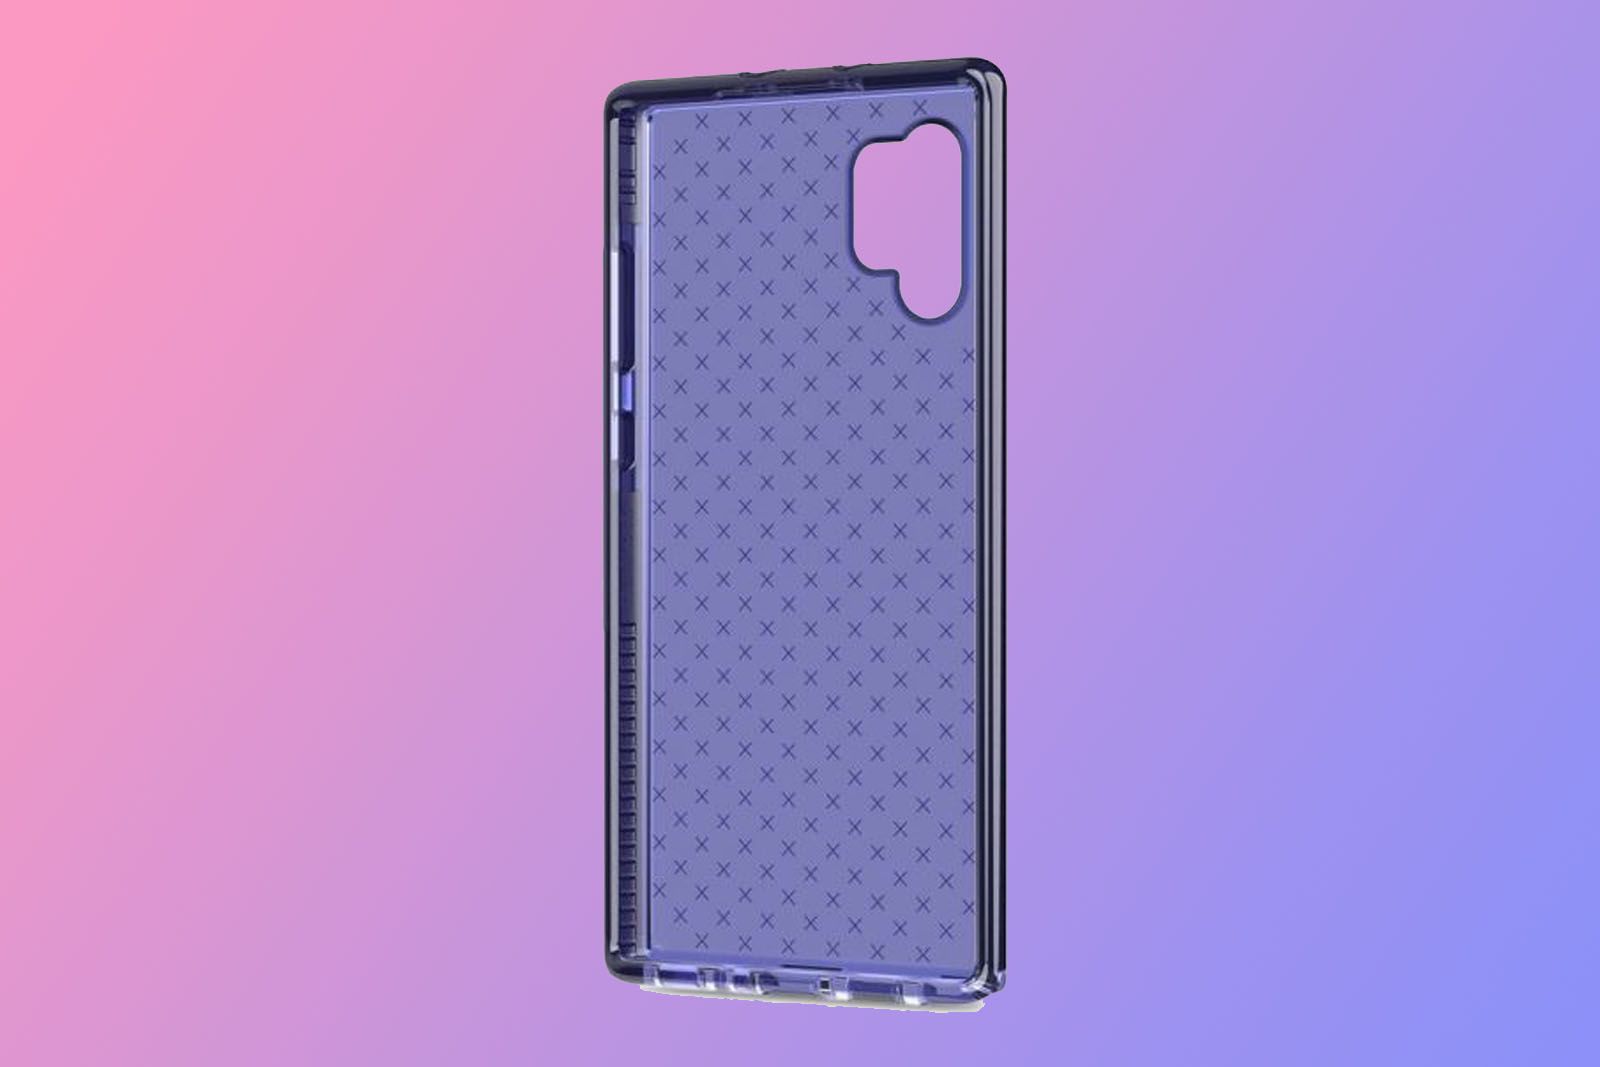 Best Note 10 And Note 10 Cases Protect Your New Samsung Phone image 11